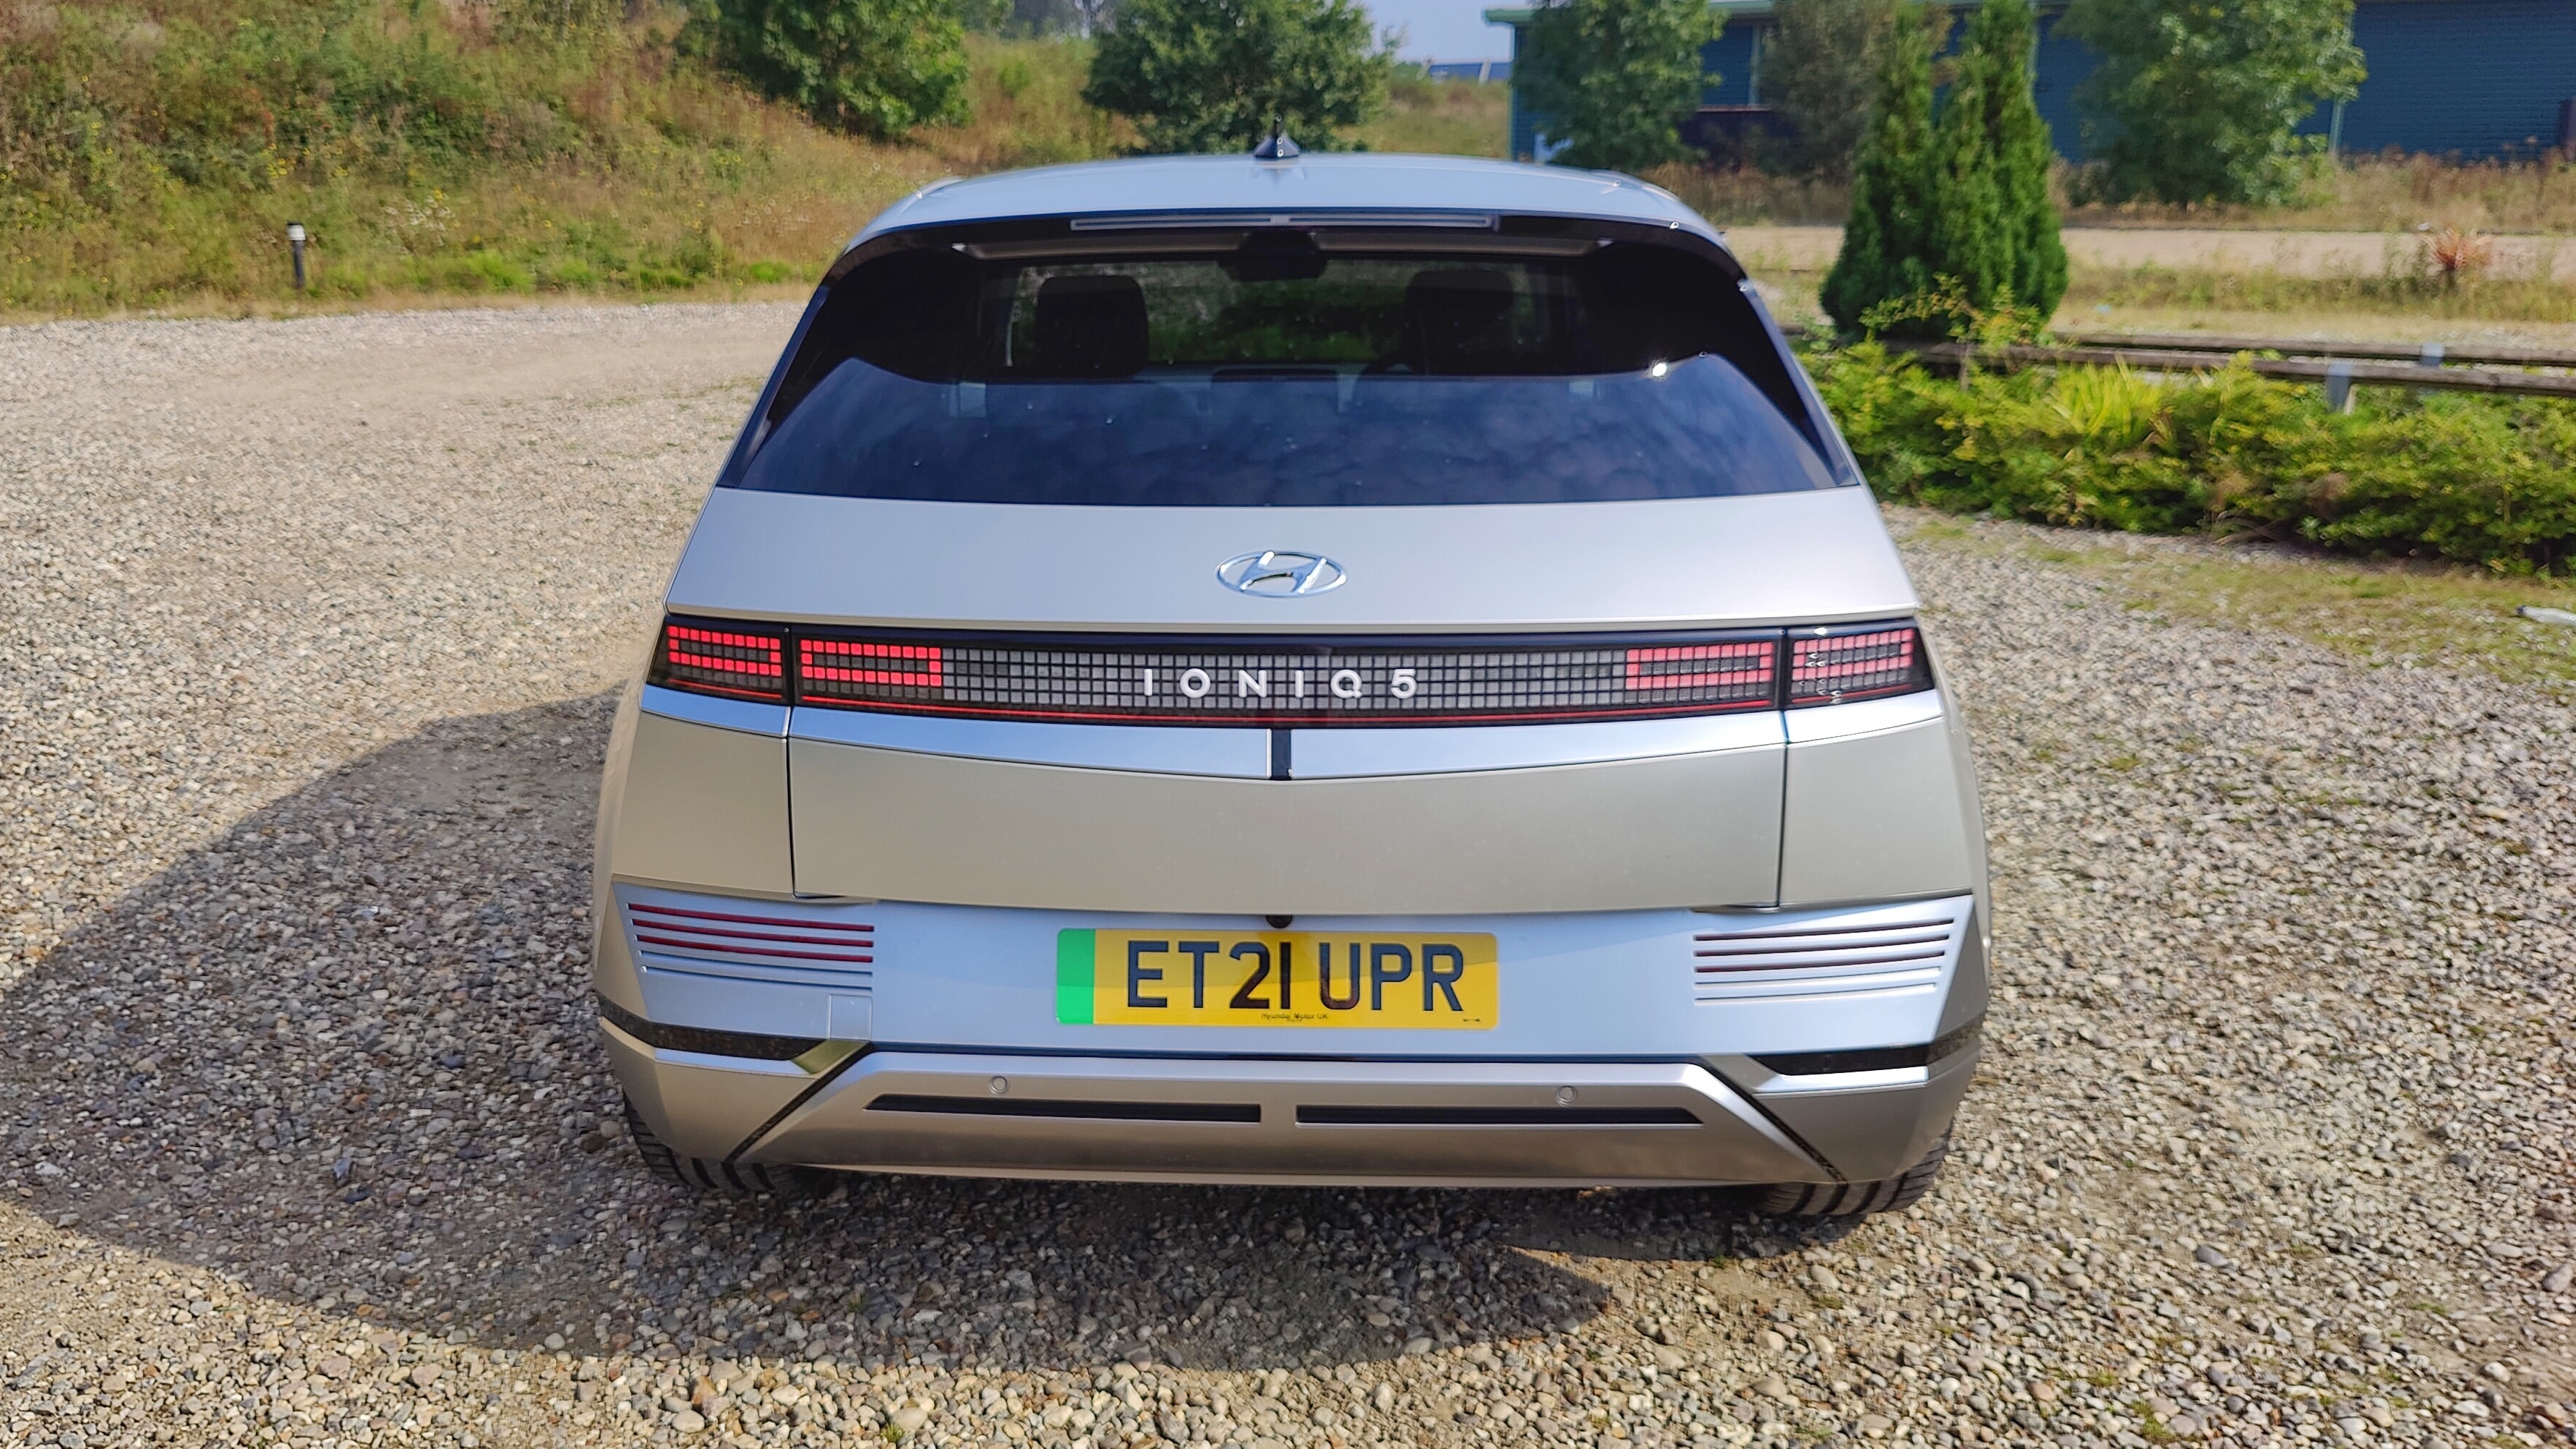 Rear-on view of Ioniq in gravel parking lot